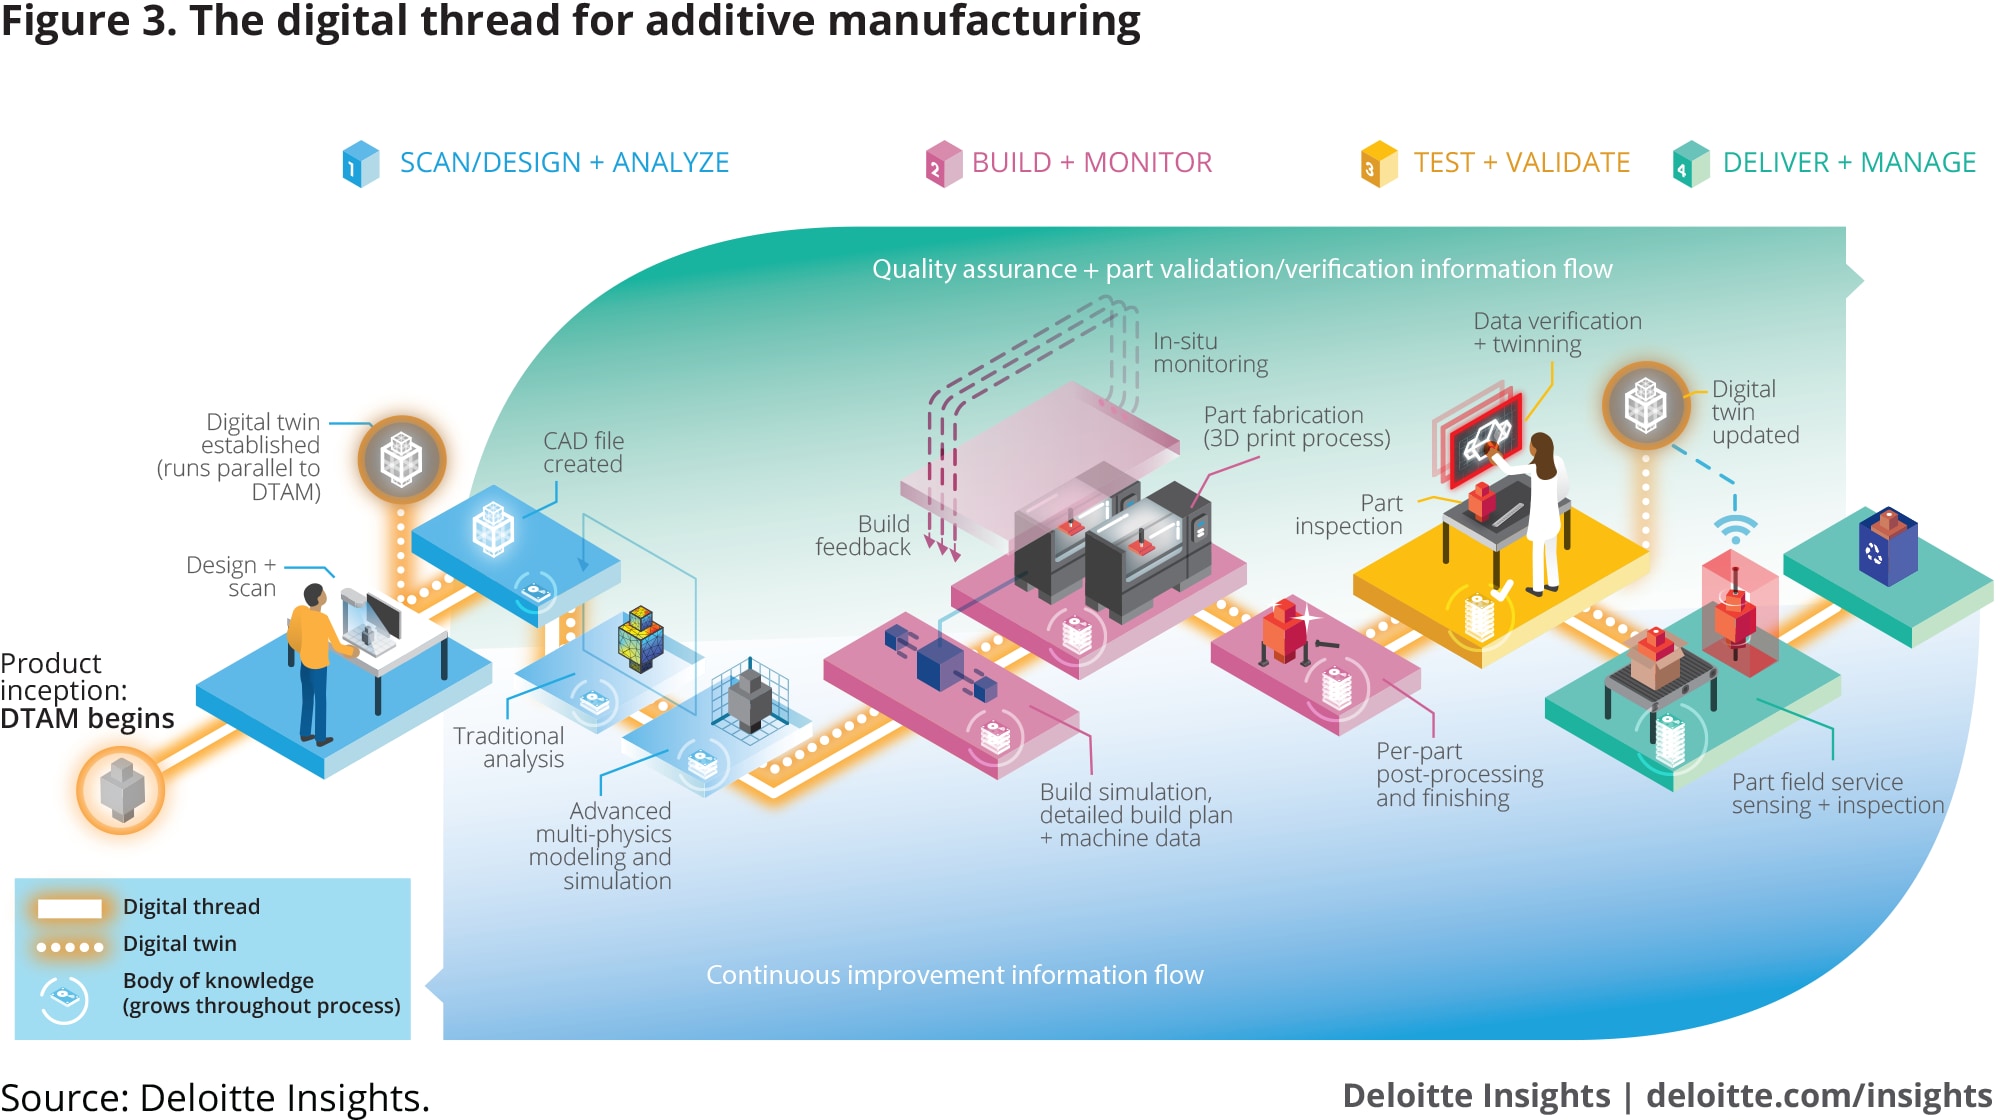 The digital thread for additive manufacturing